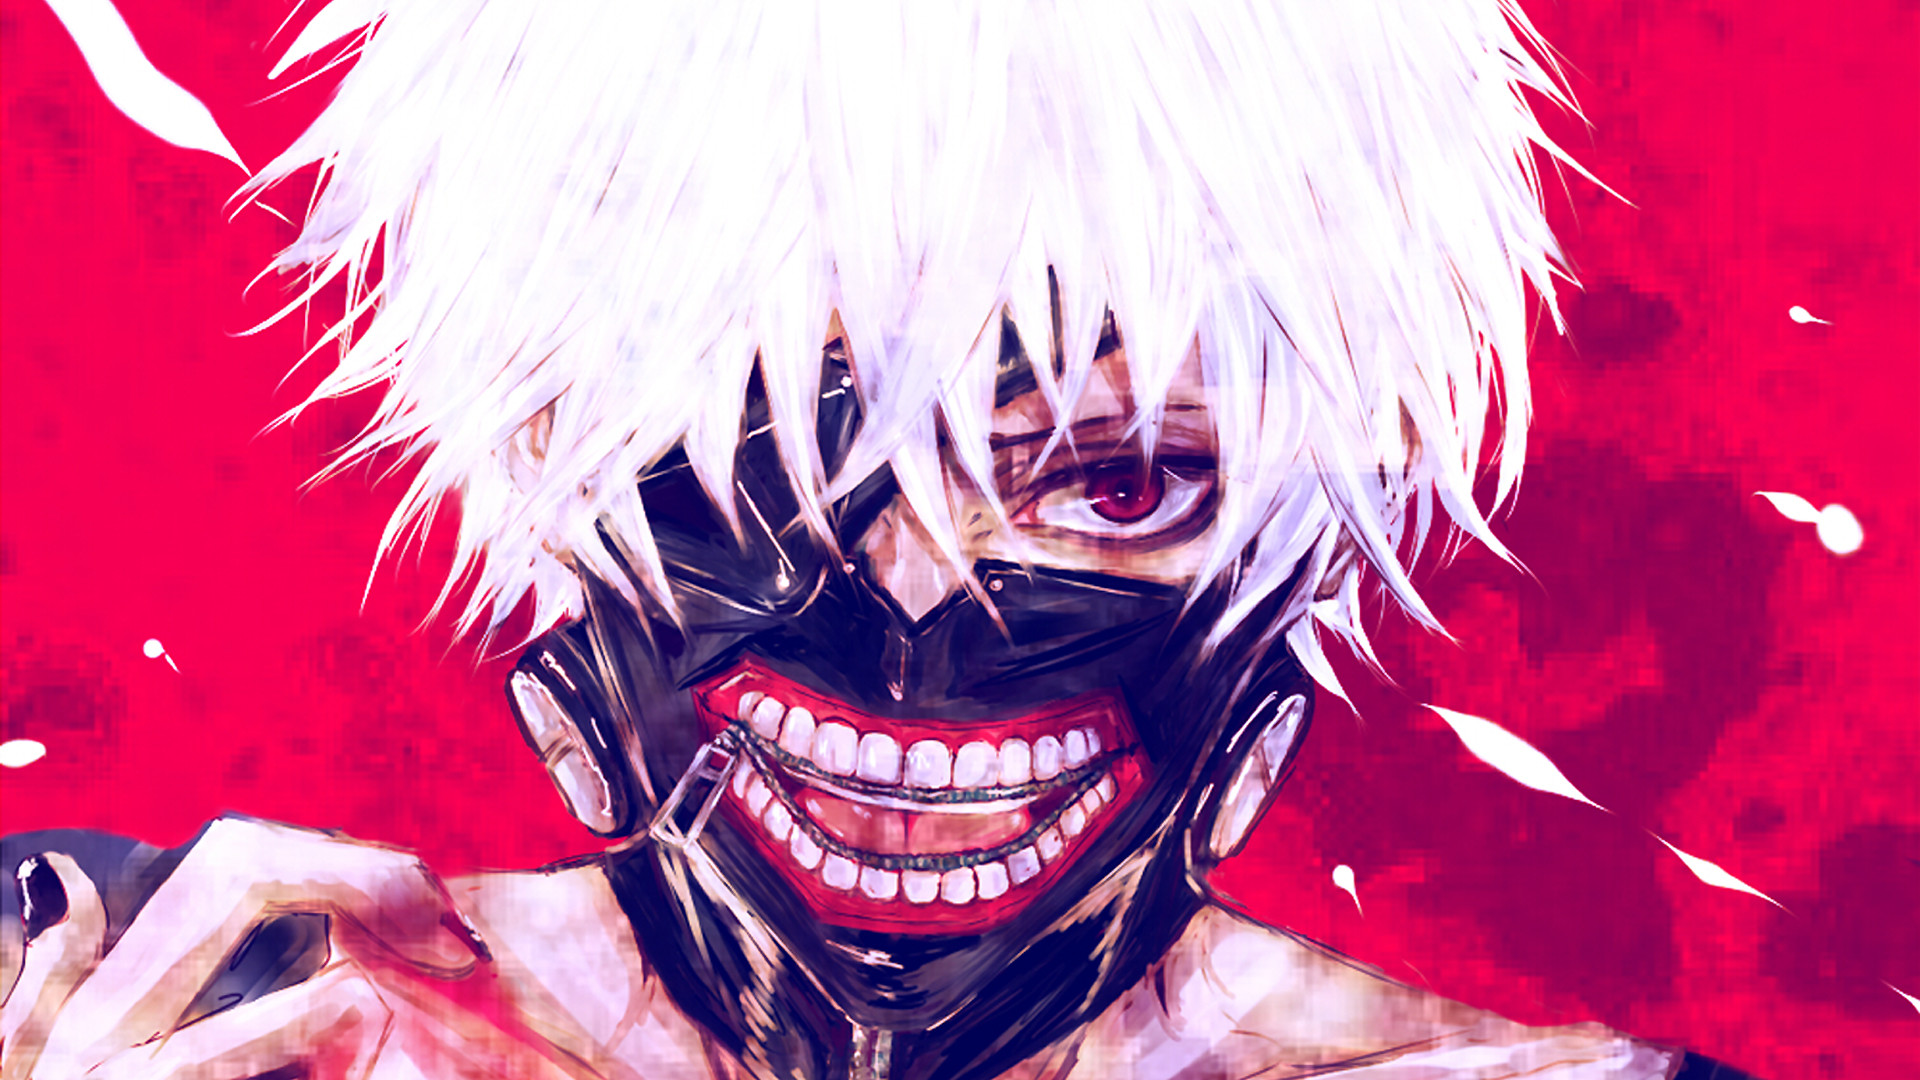 1920x1080 View, download, comment, and rate this  Tokyo Ghoul Wallpaper -  Wallpaper Abyss